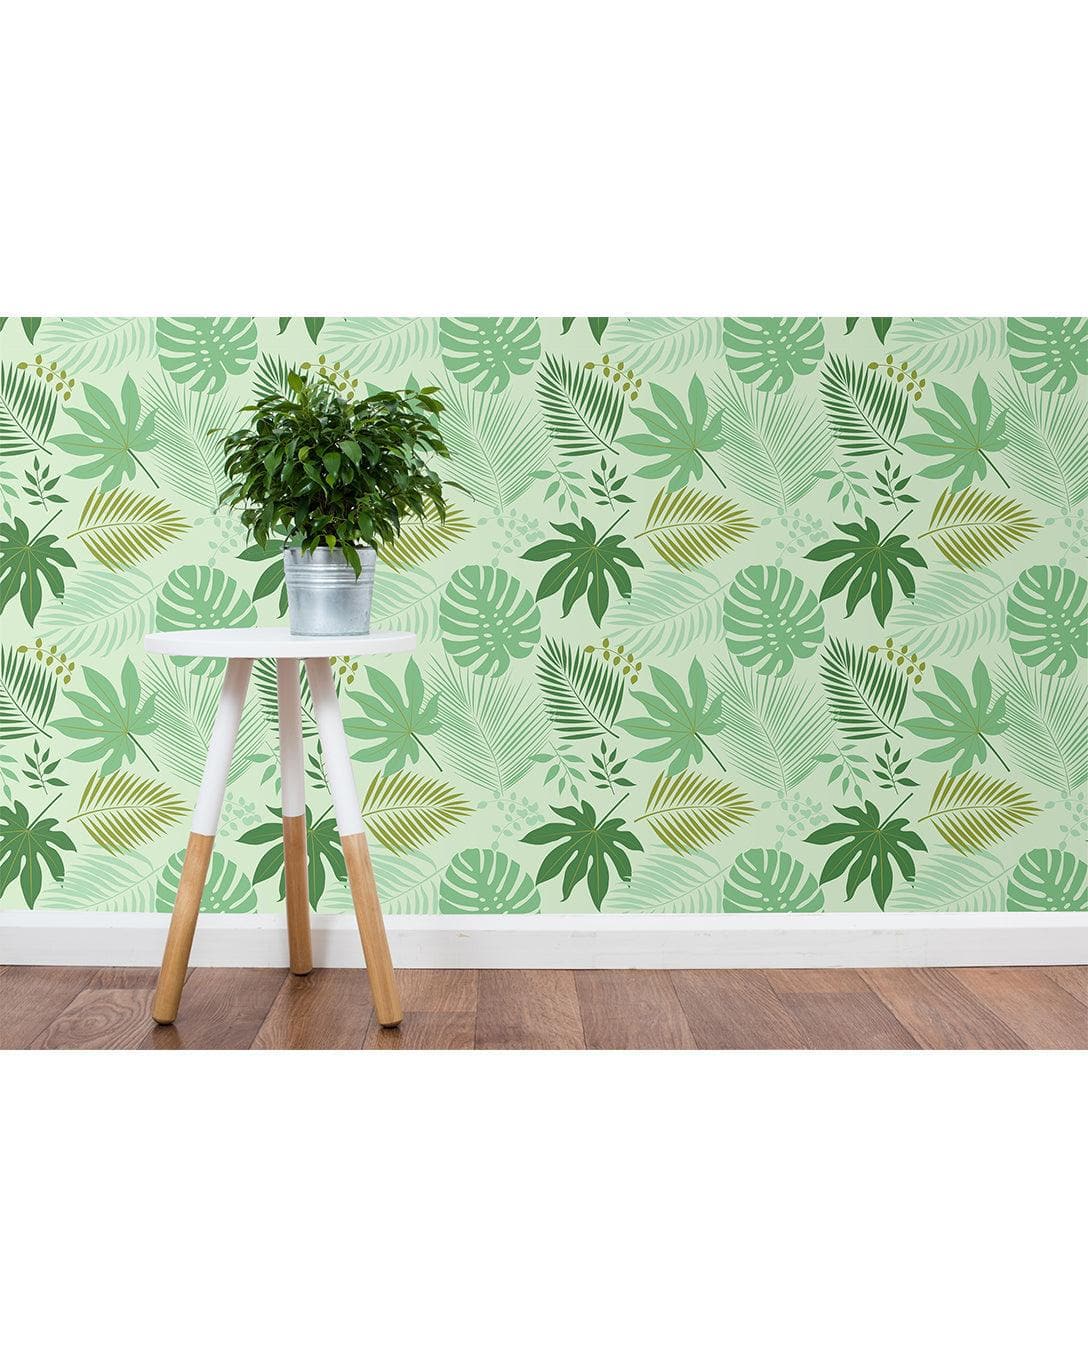 Green Tropical Palm Leaves Wallpaper Green Tropical Palm Leaves Wallpaper 